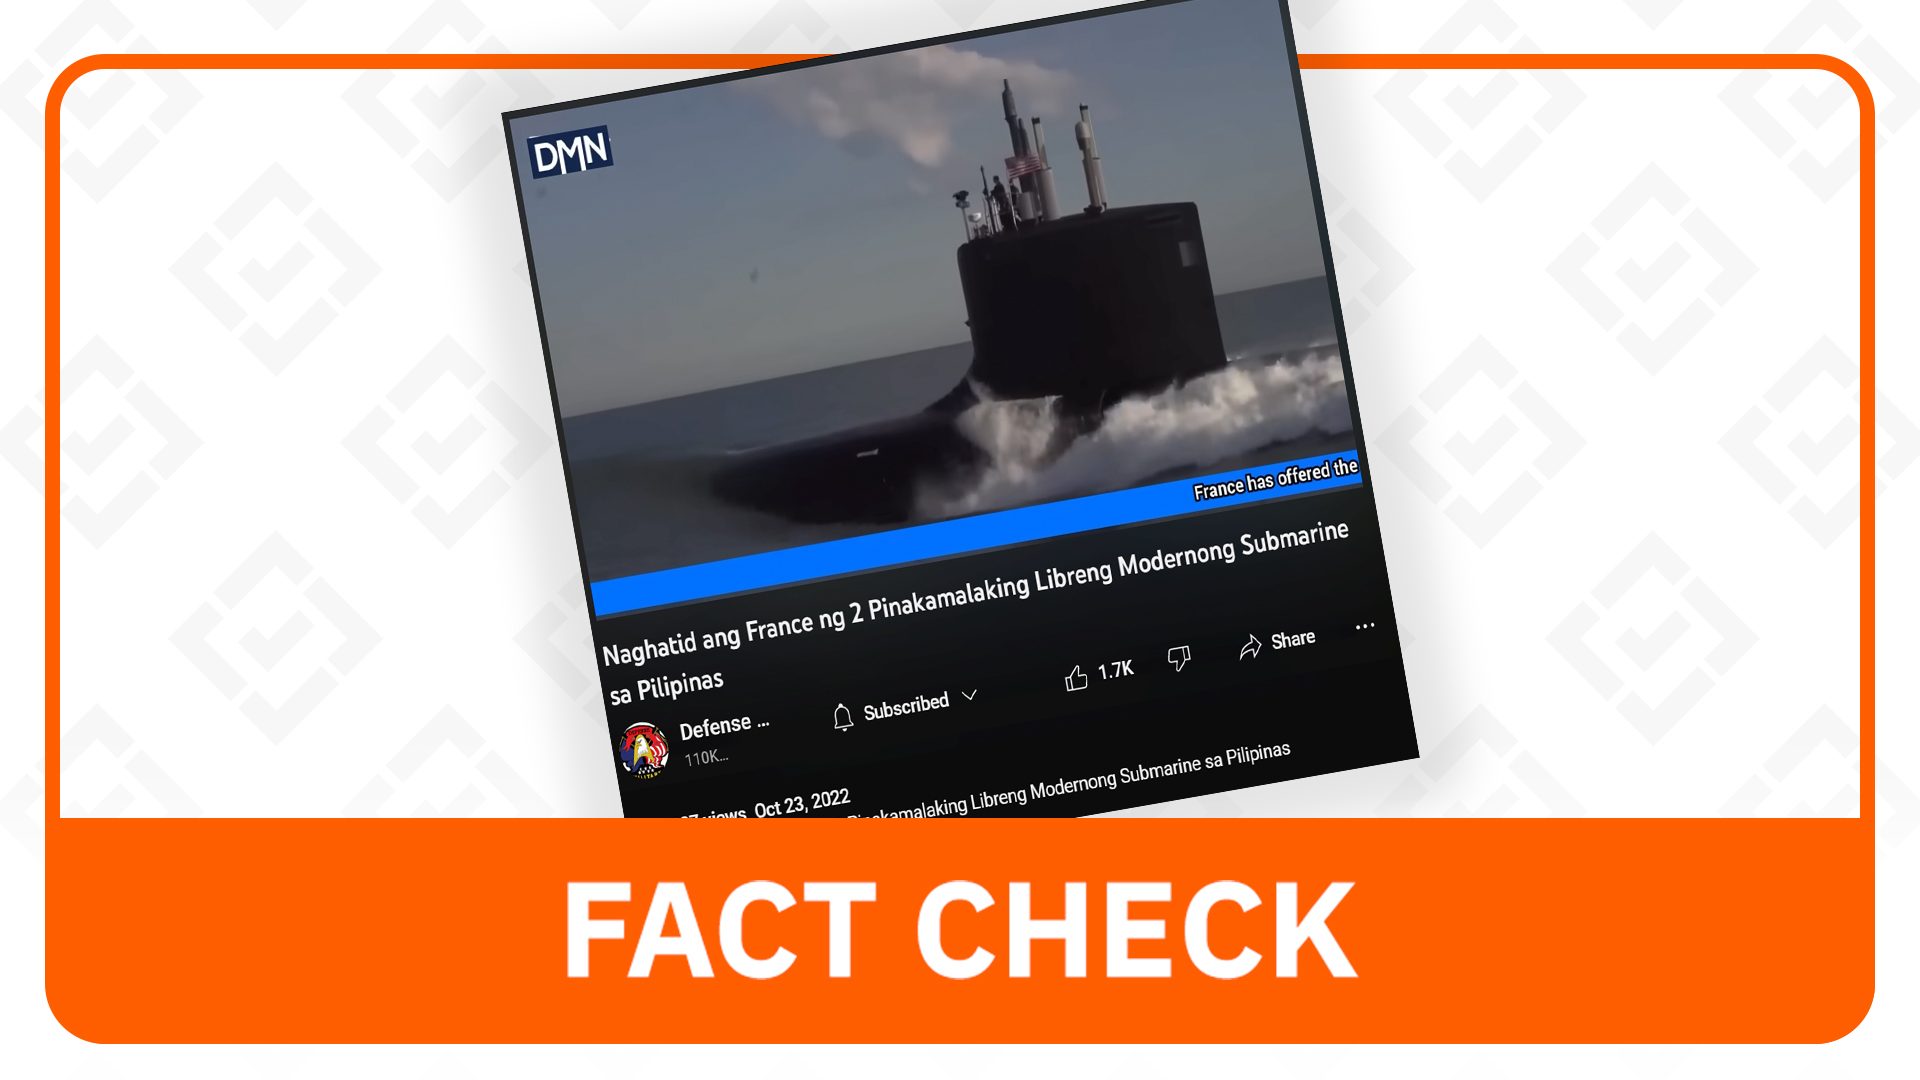 FACT CHECK: France has not delivered free submarines to the Philippines